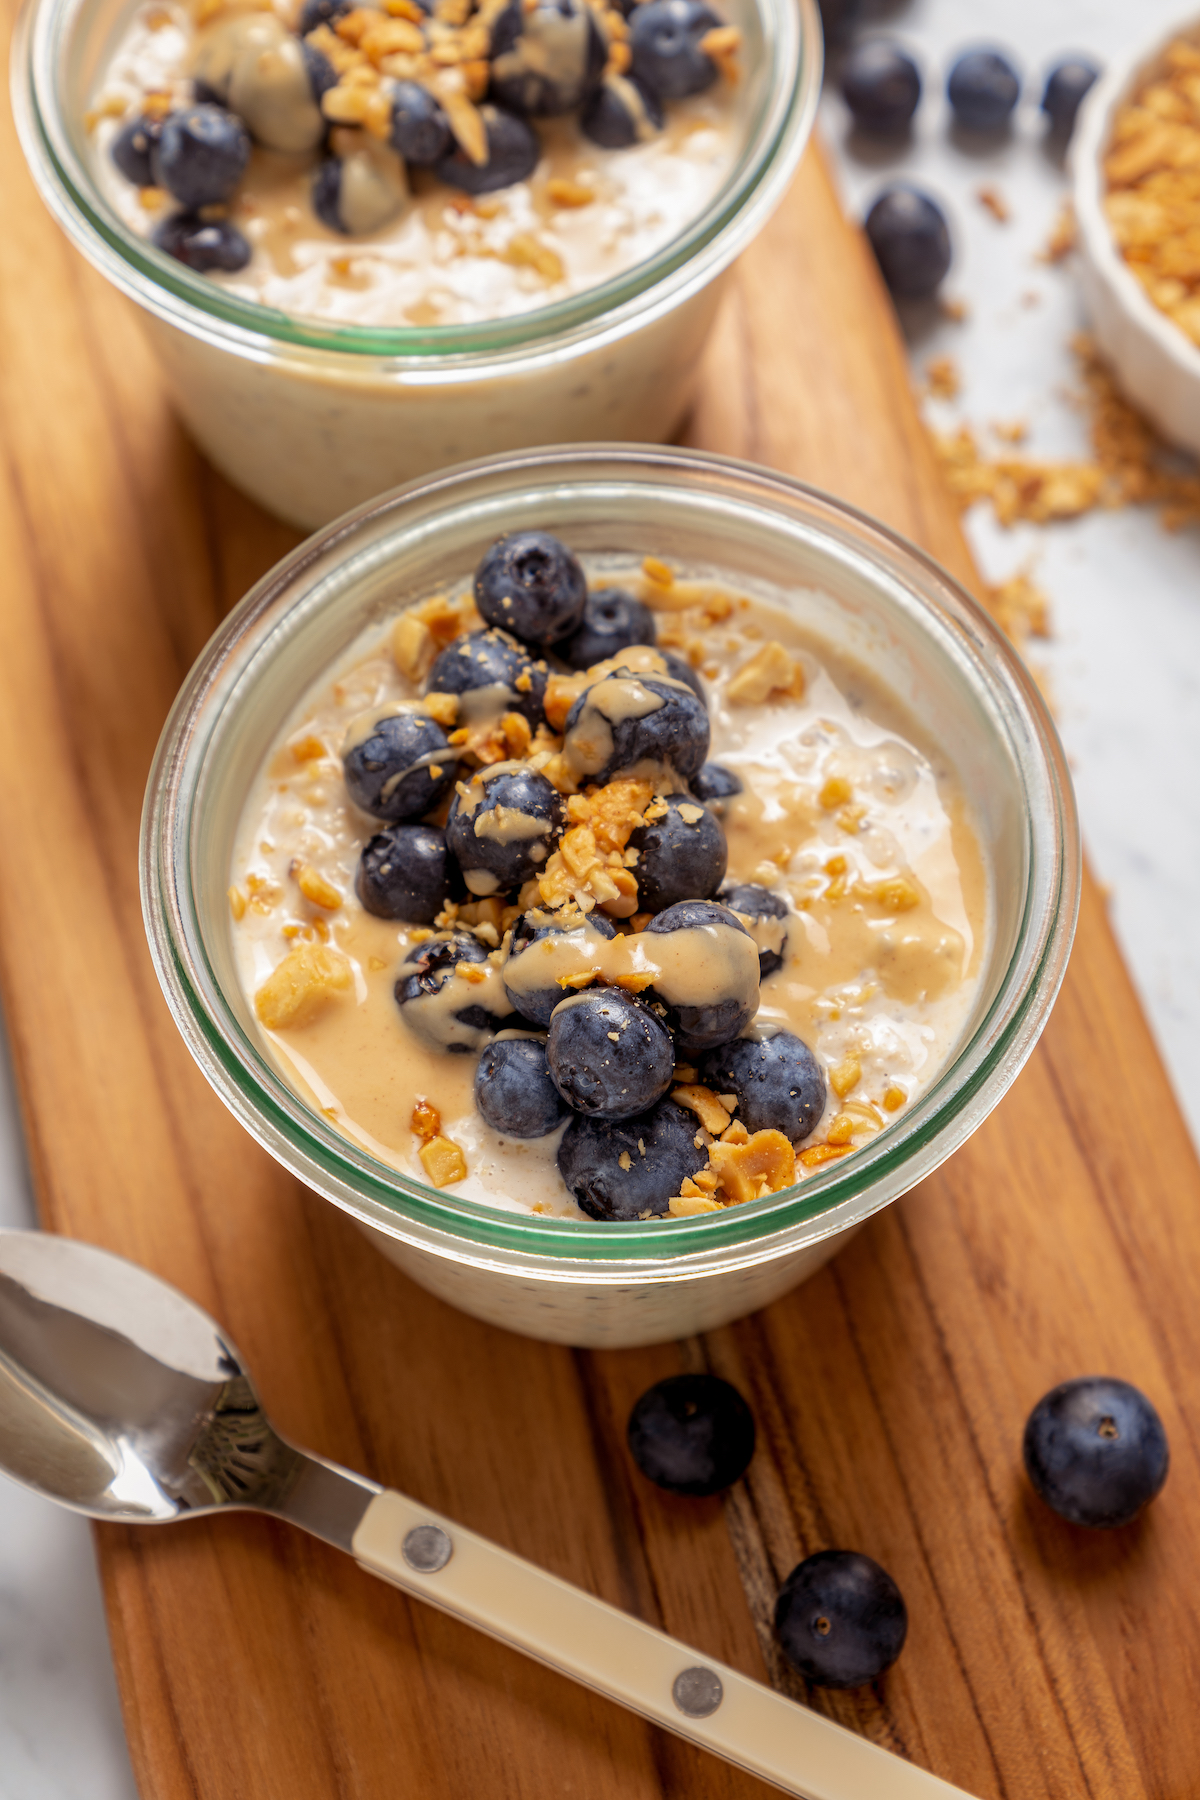 Sweet overnight oatmeal with fruit and peanut butter.